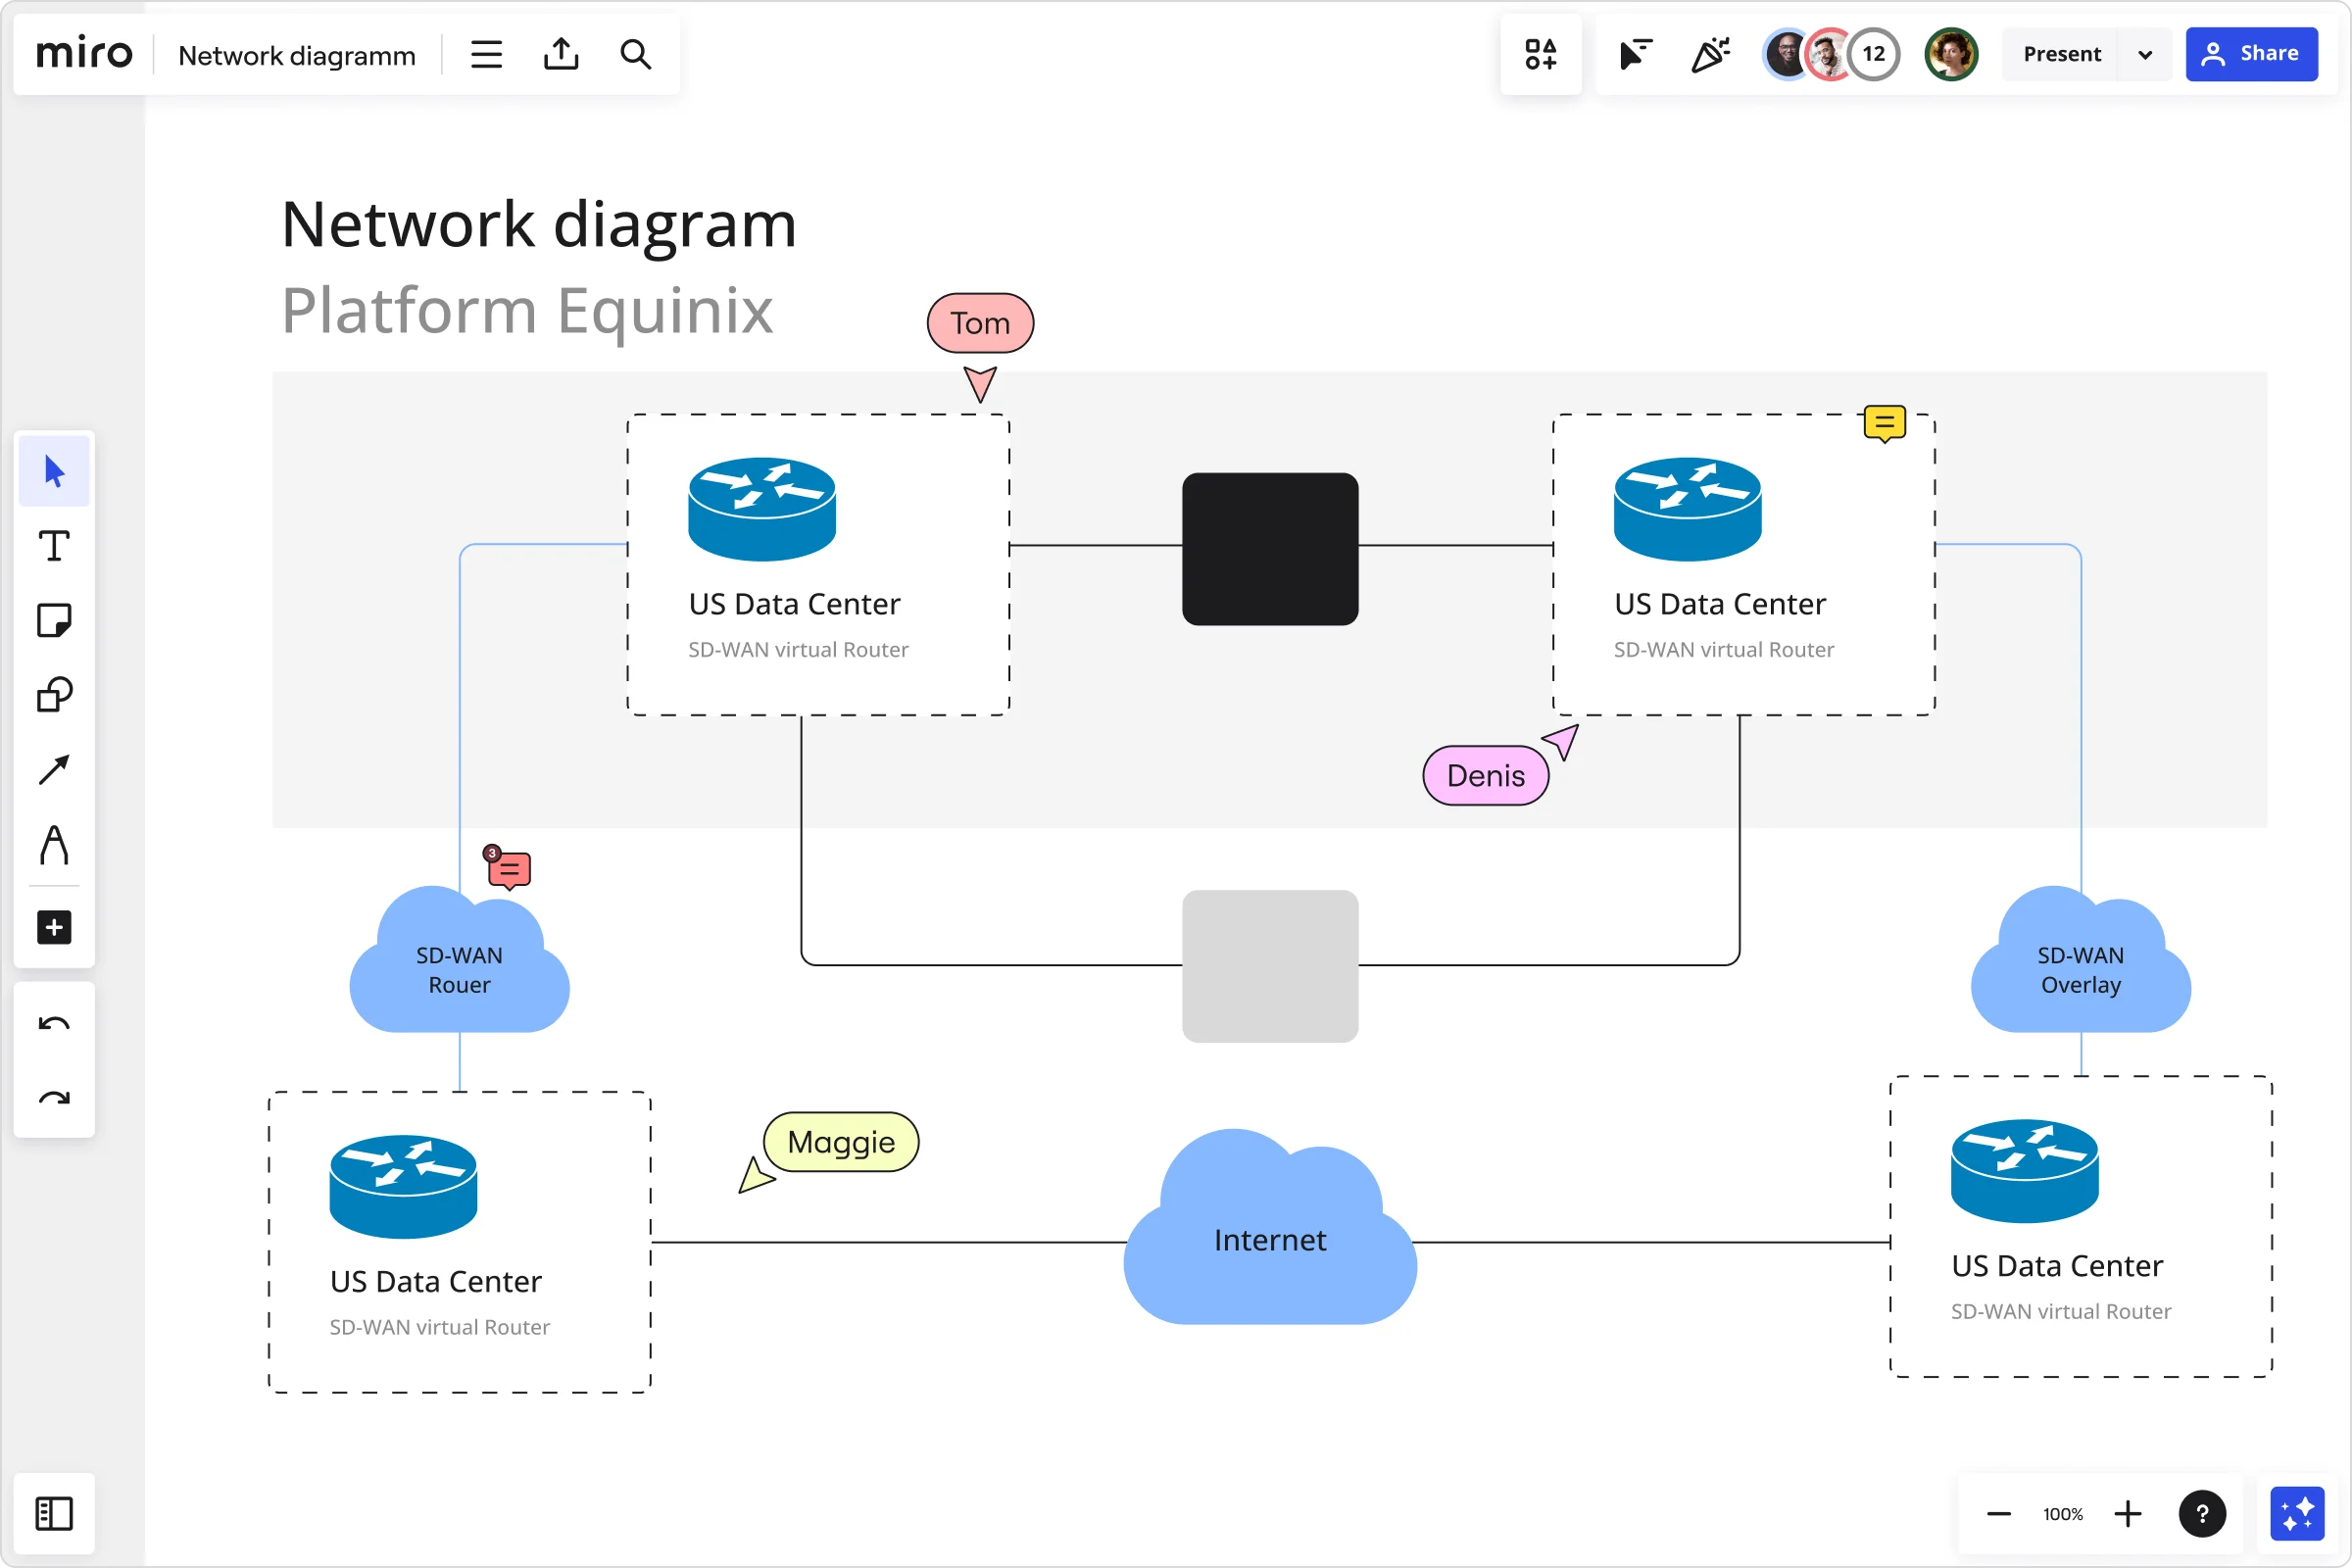 An image showing Miro's online network diagram tool